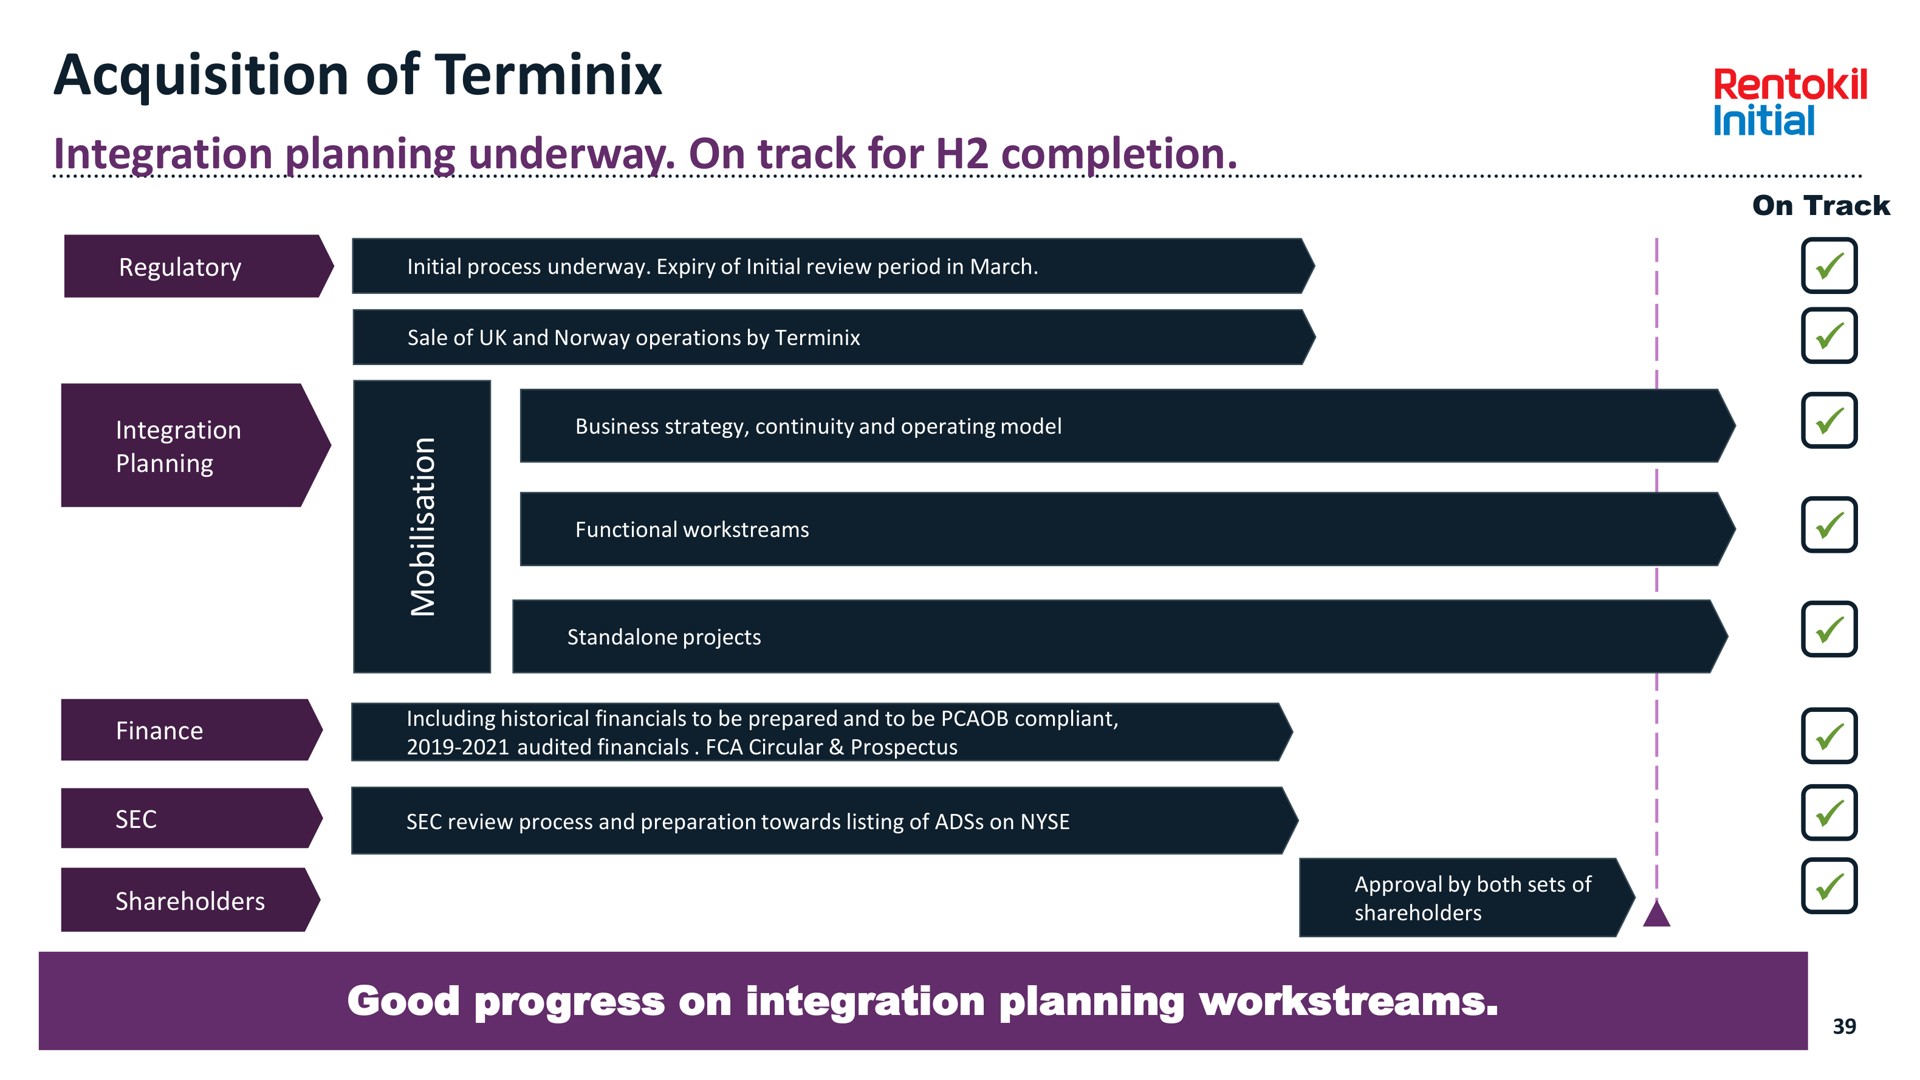 acquisition of integration planning underway on track for completion | Rentokil Initial